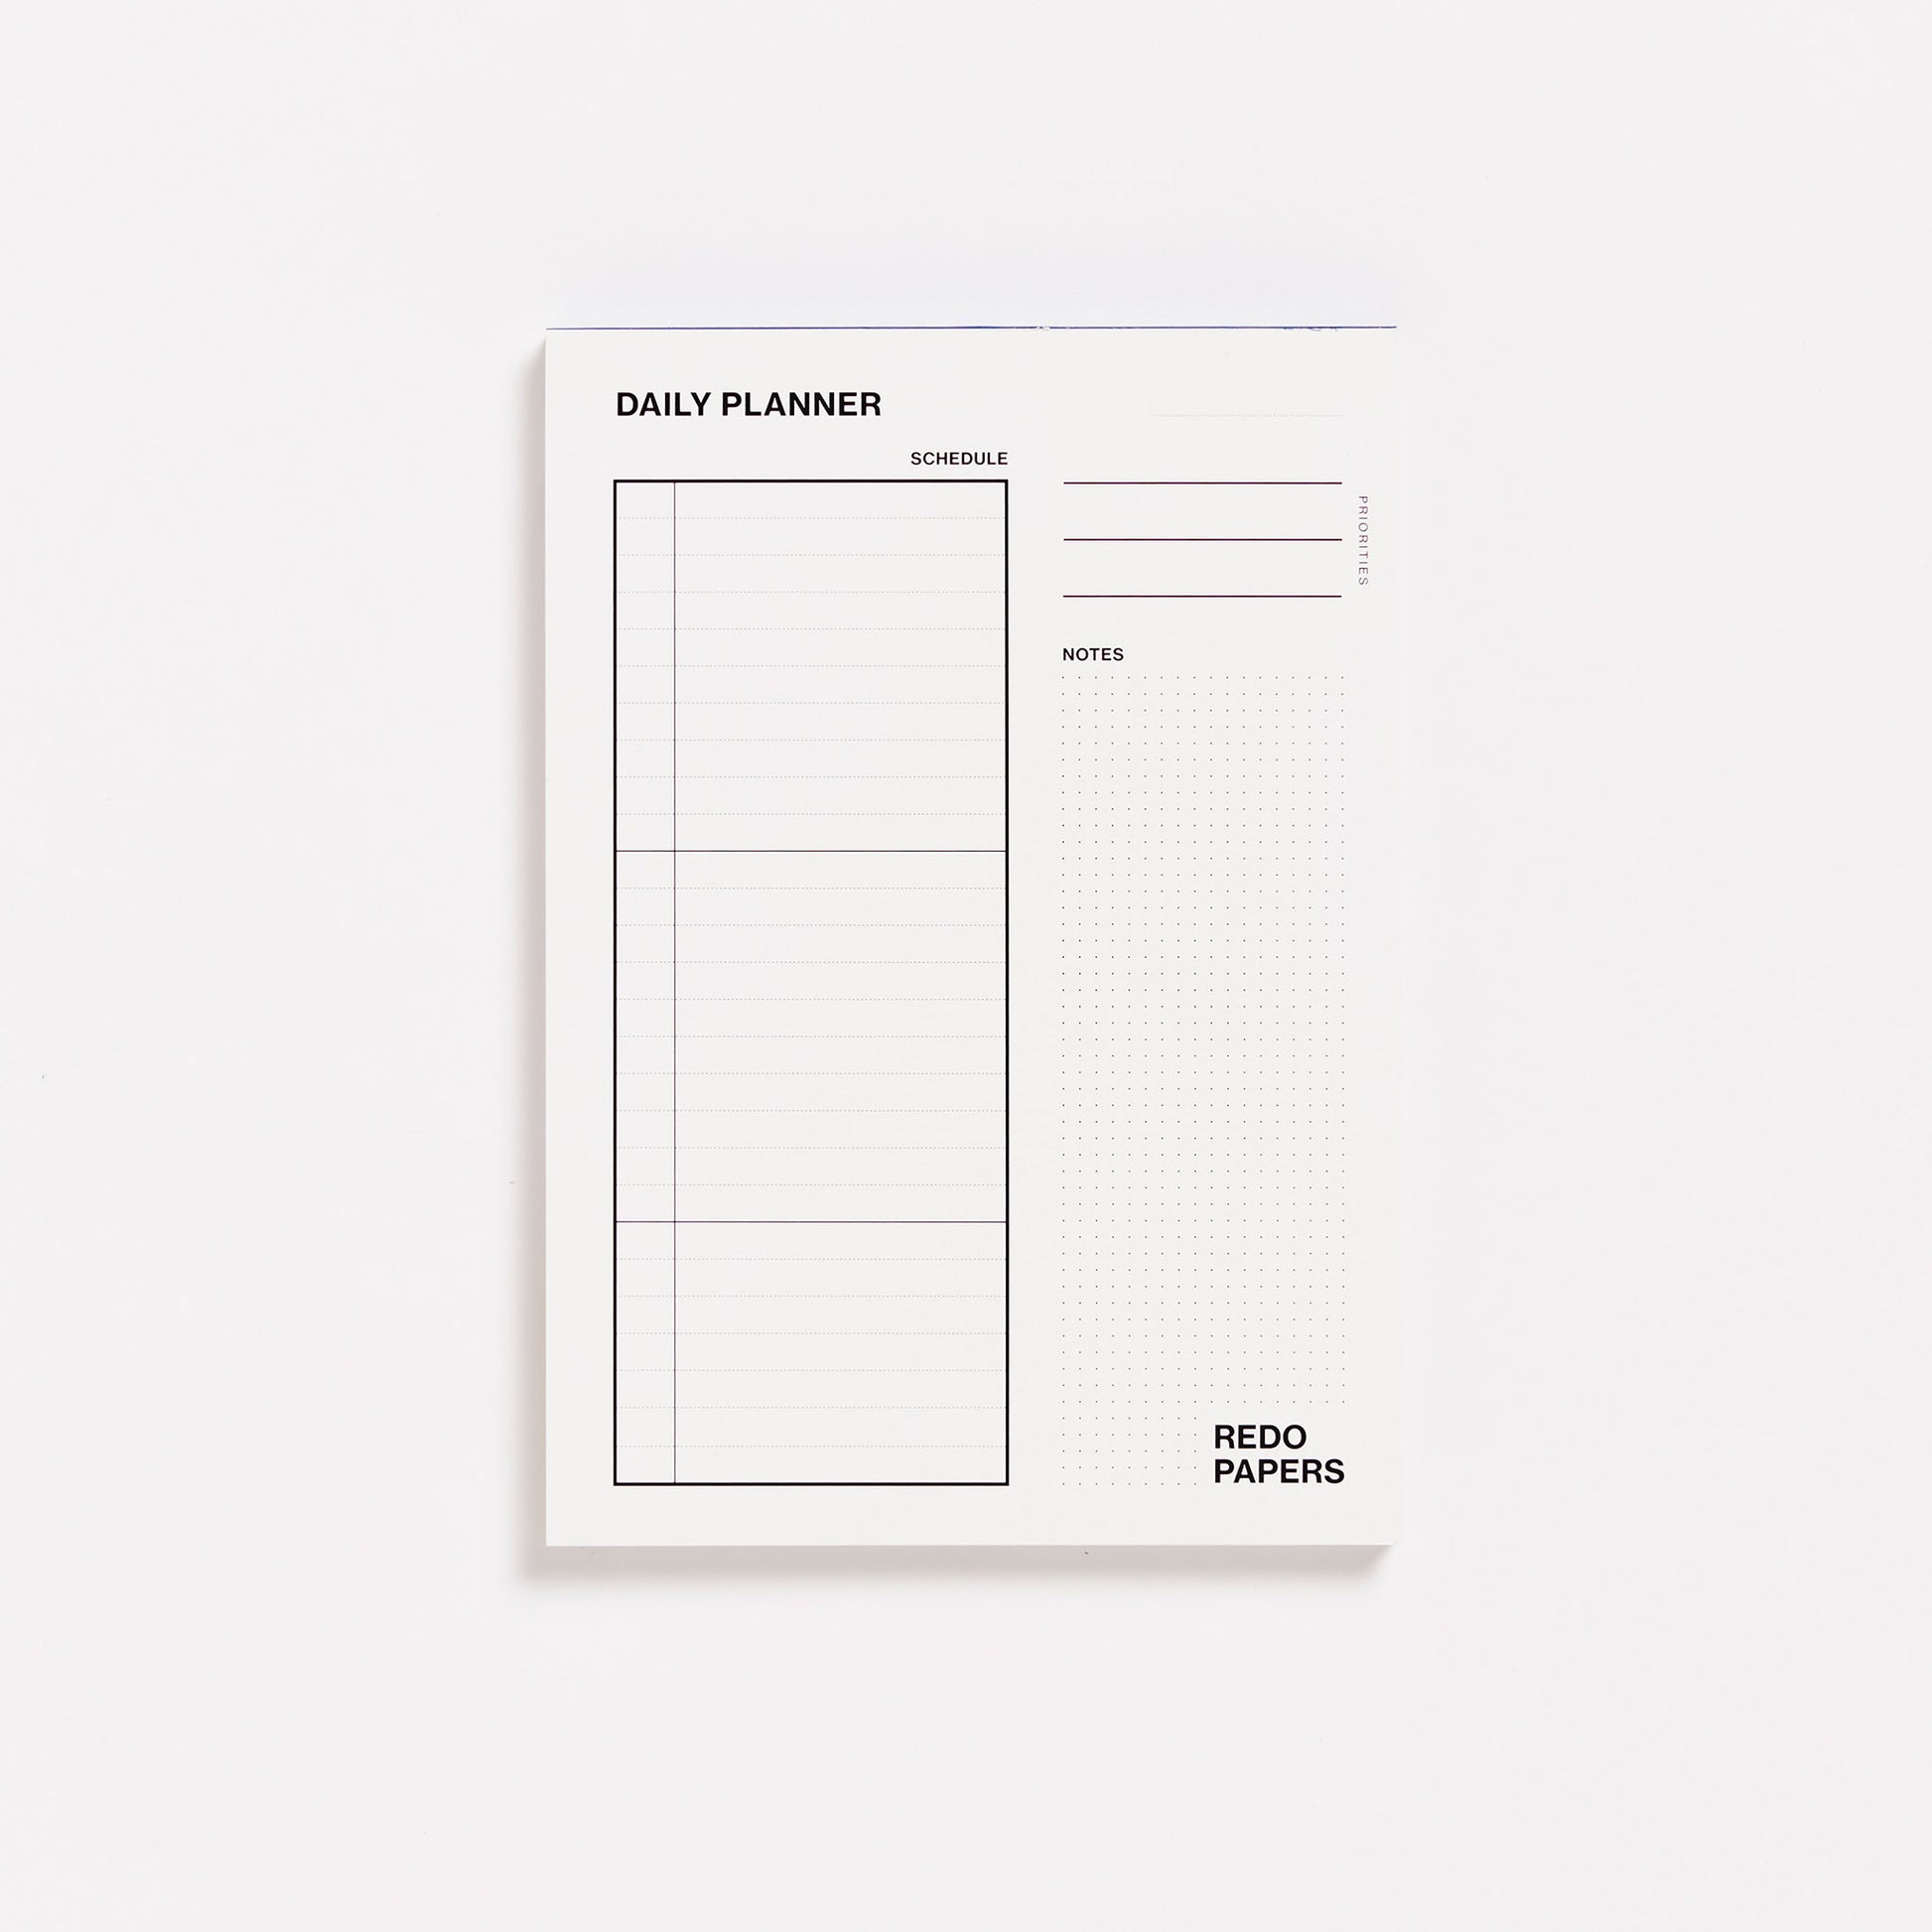 Prioritize with our daily planner. A good start is half the battle.